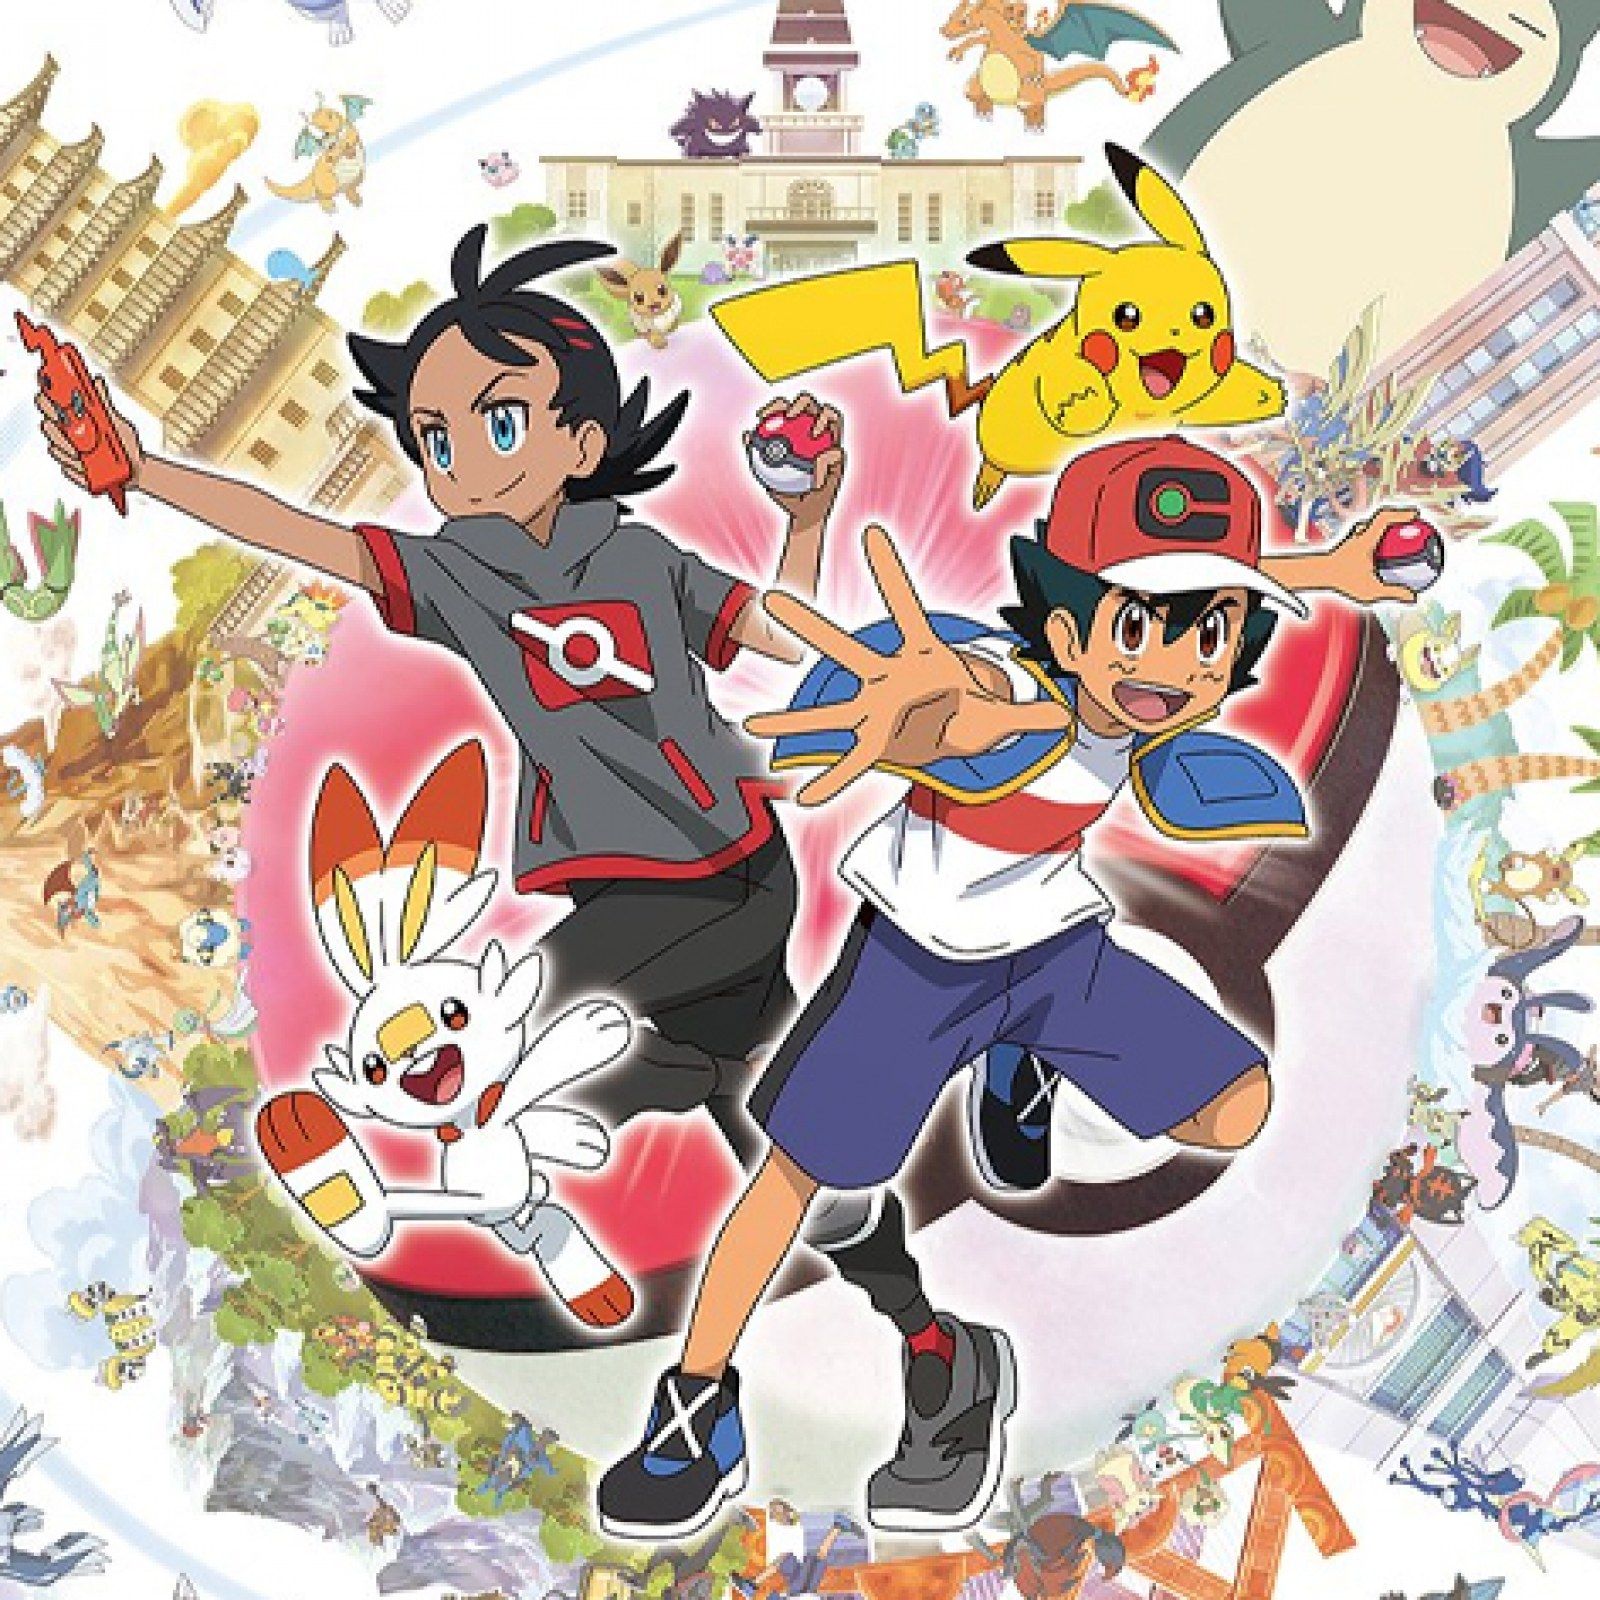 New 'Pokémon' Anime Confirms Upcoming Series to Include